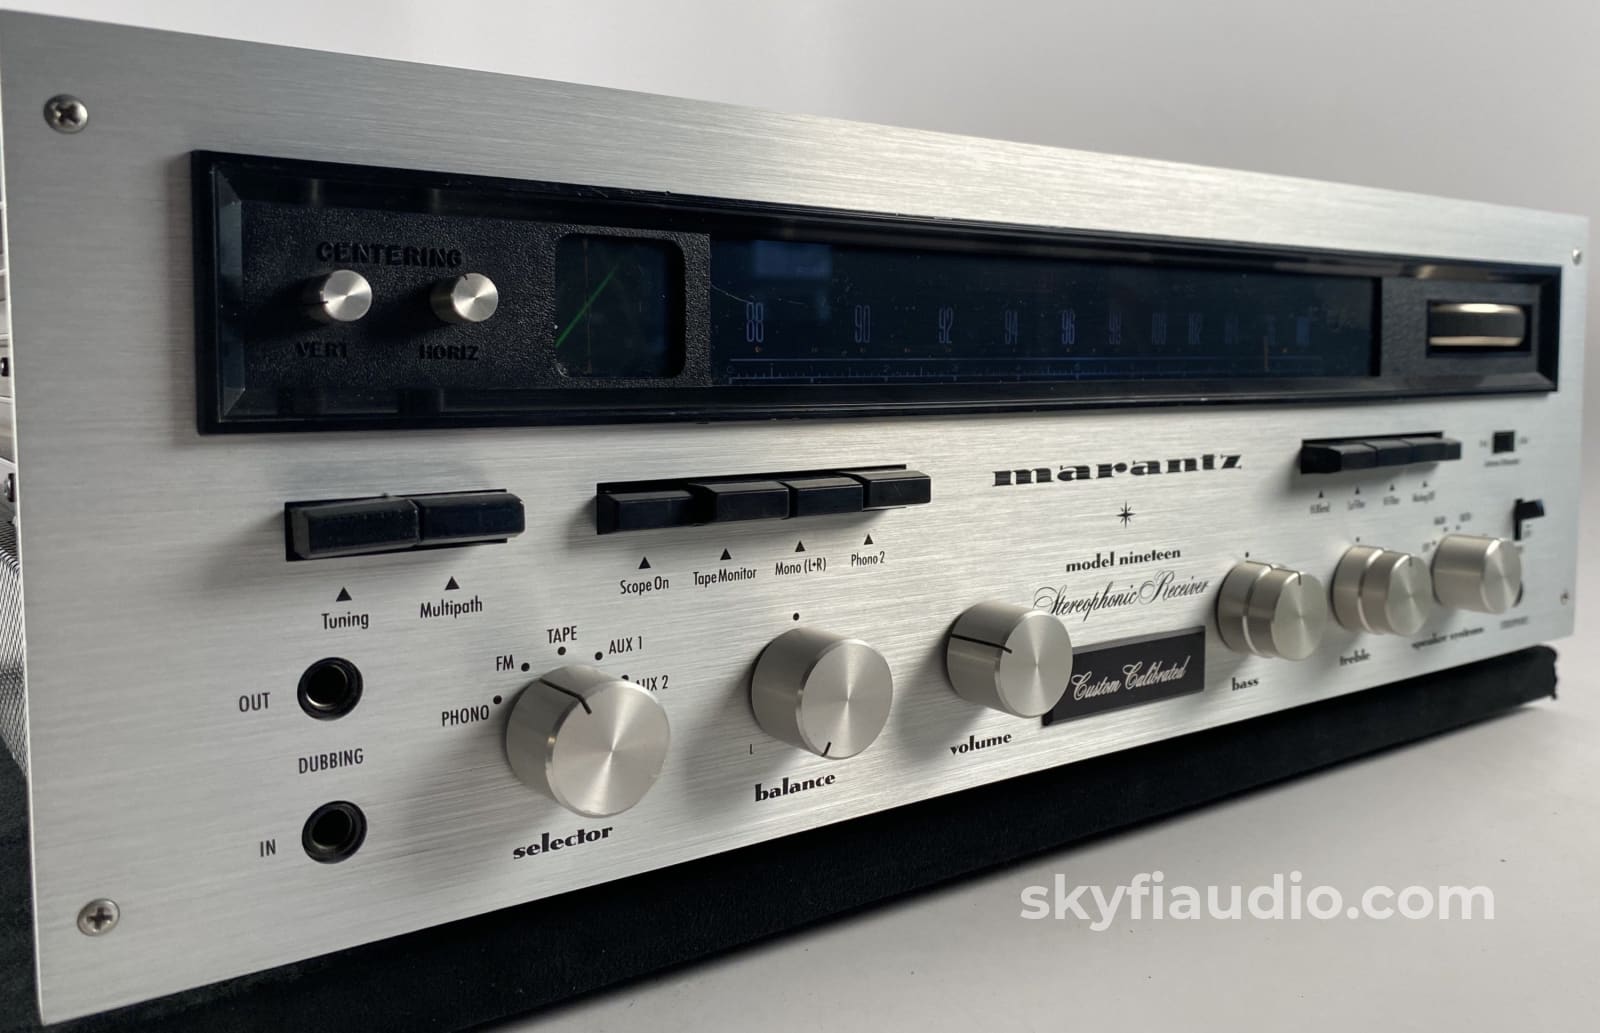 Marantz Model 19 Stereophonic Receiver With Scope - Super Minty One Of The Best Receivers Ever Made